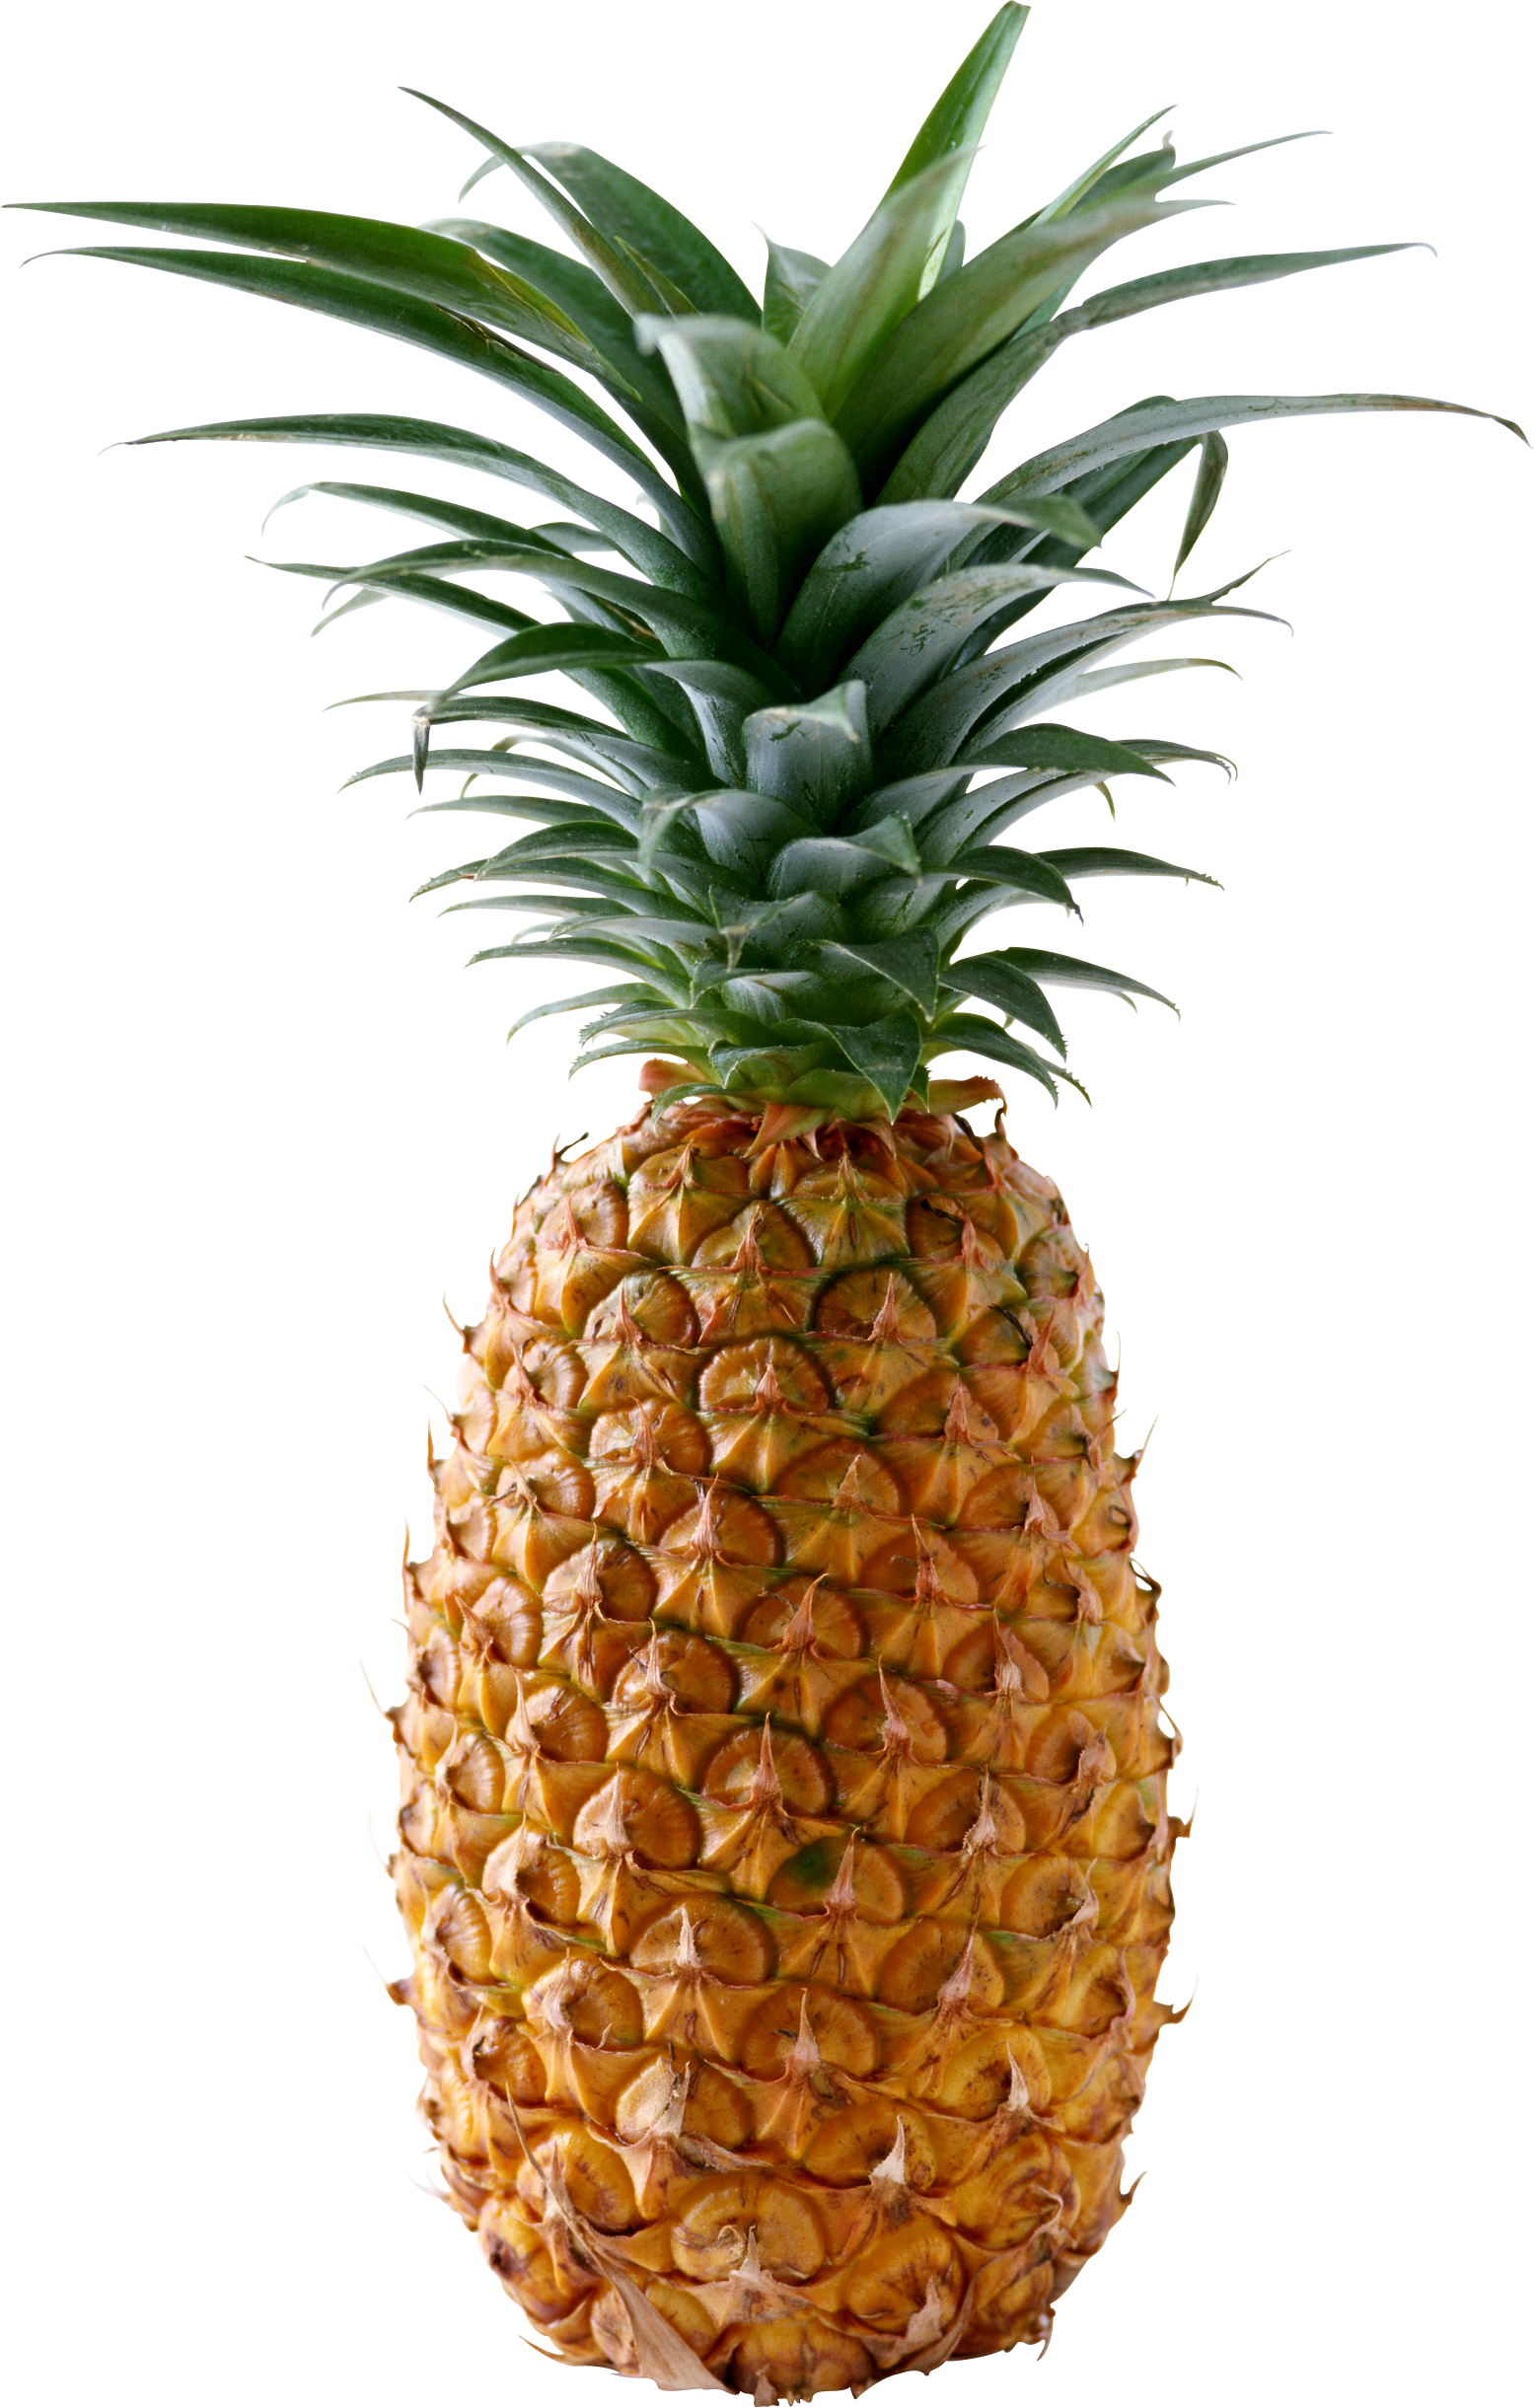 pineapple png transparent pineapple images #18467